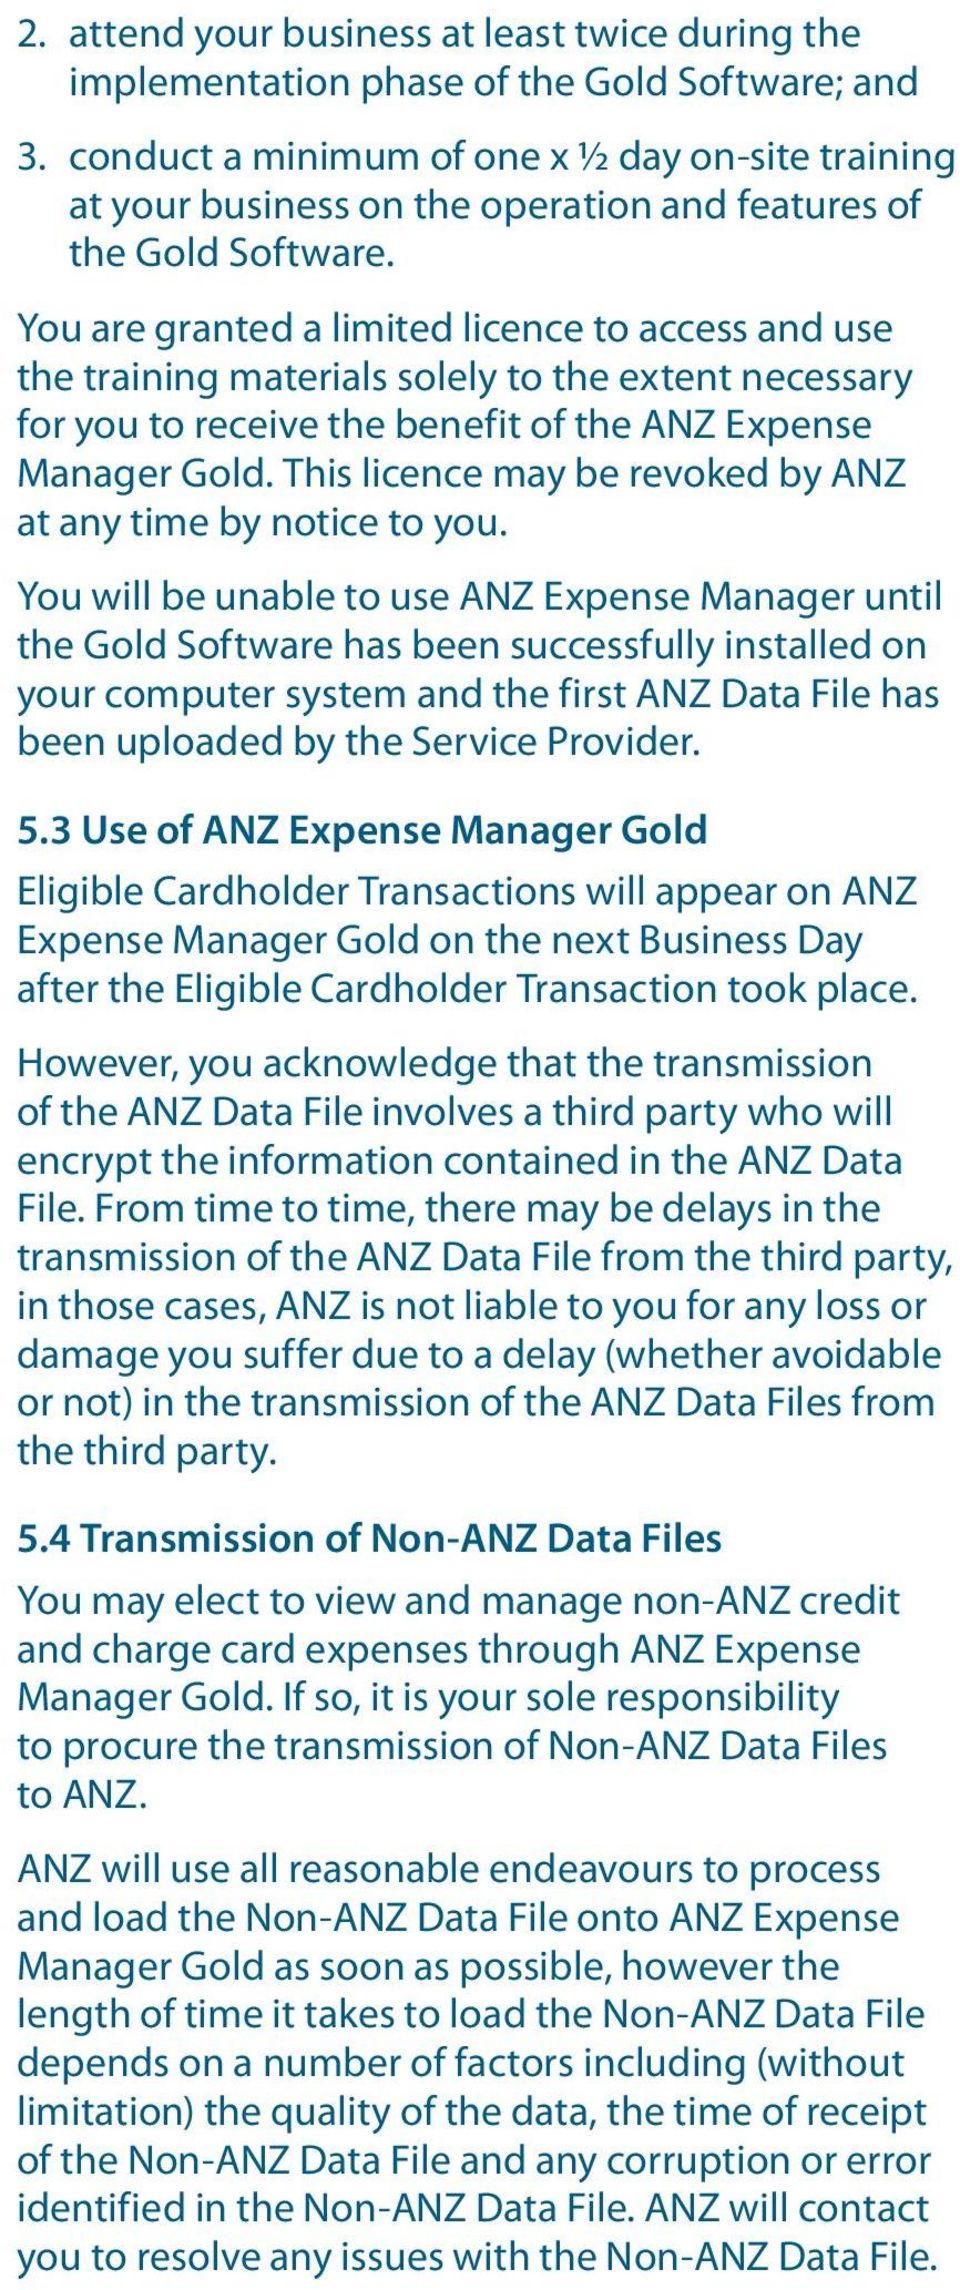 You are granted a limited licence to access and use the training materials solely to the extent necessary for you to receive the benefit of the ANZ Expense Manager Gold.